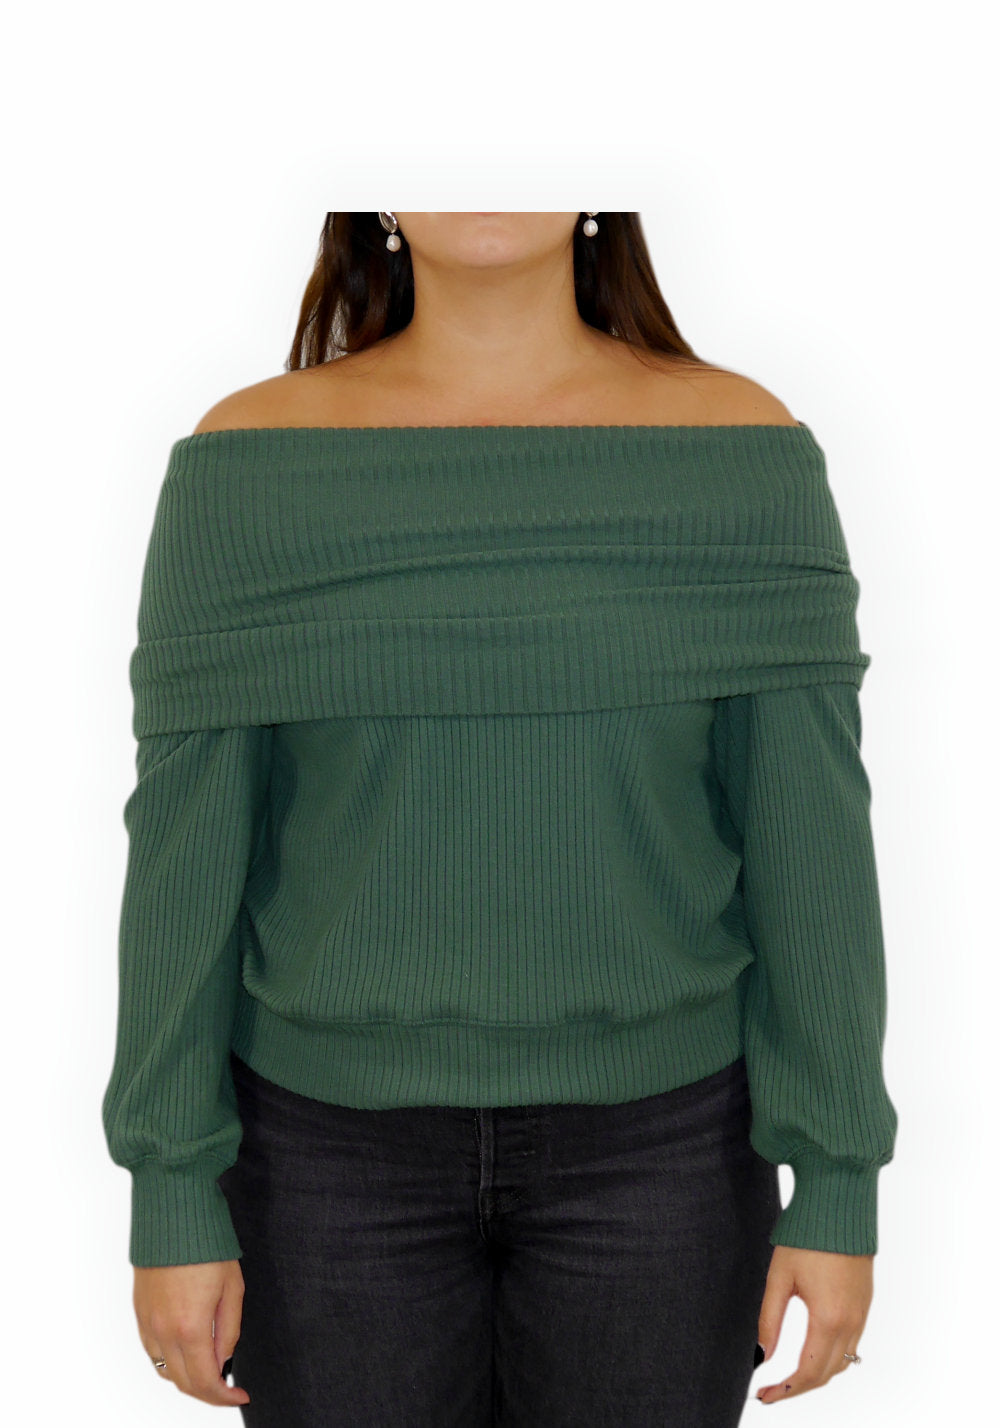 RUTH LUXE RIB OFF SHOULDER SWEATER (CYPRESS) - VELVET